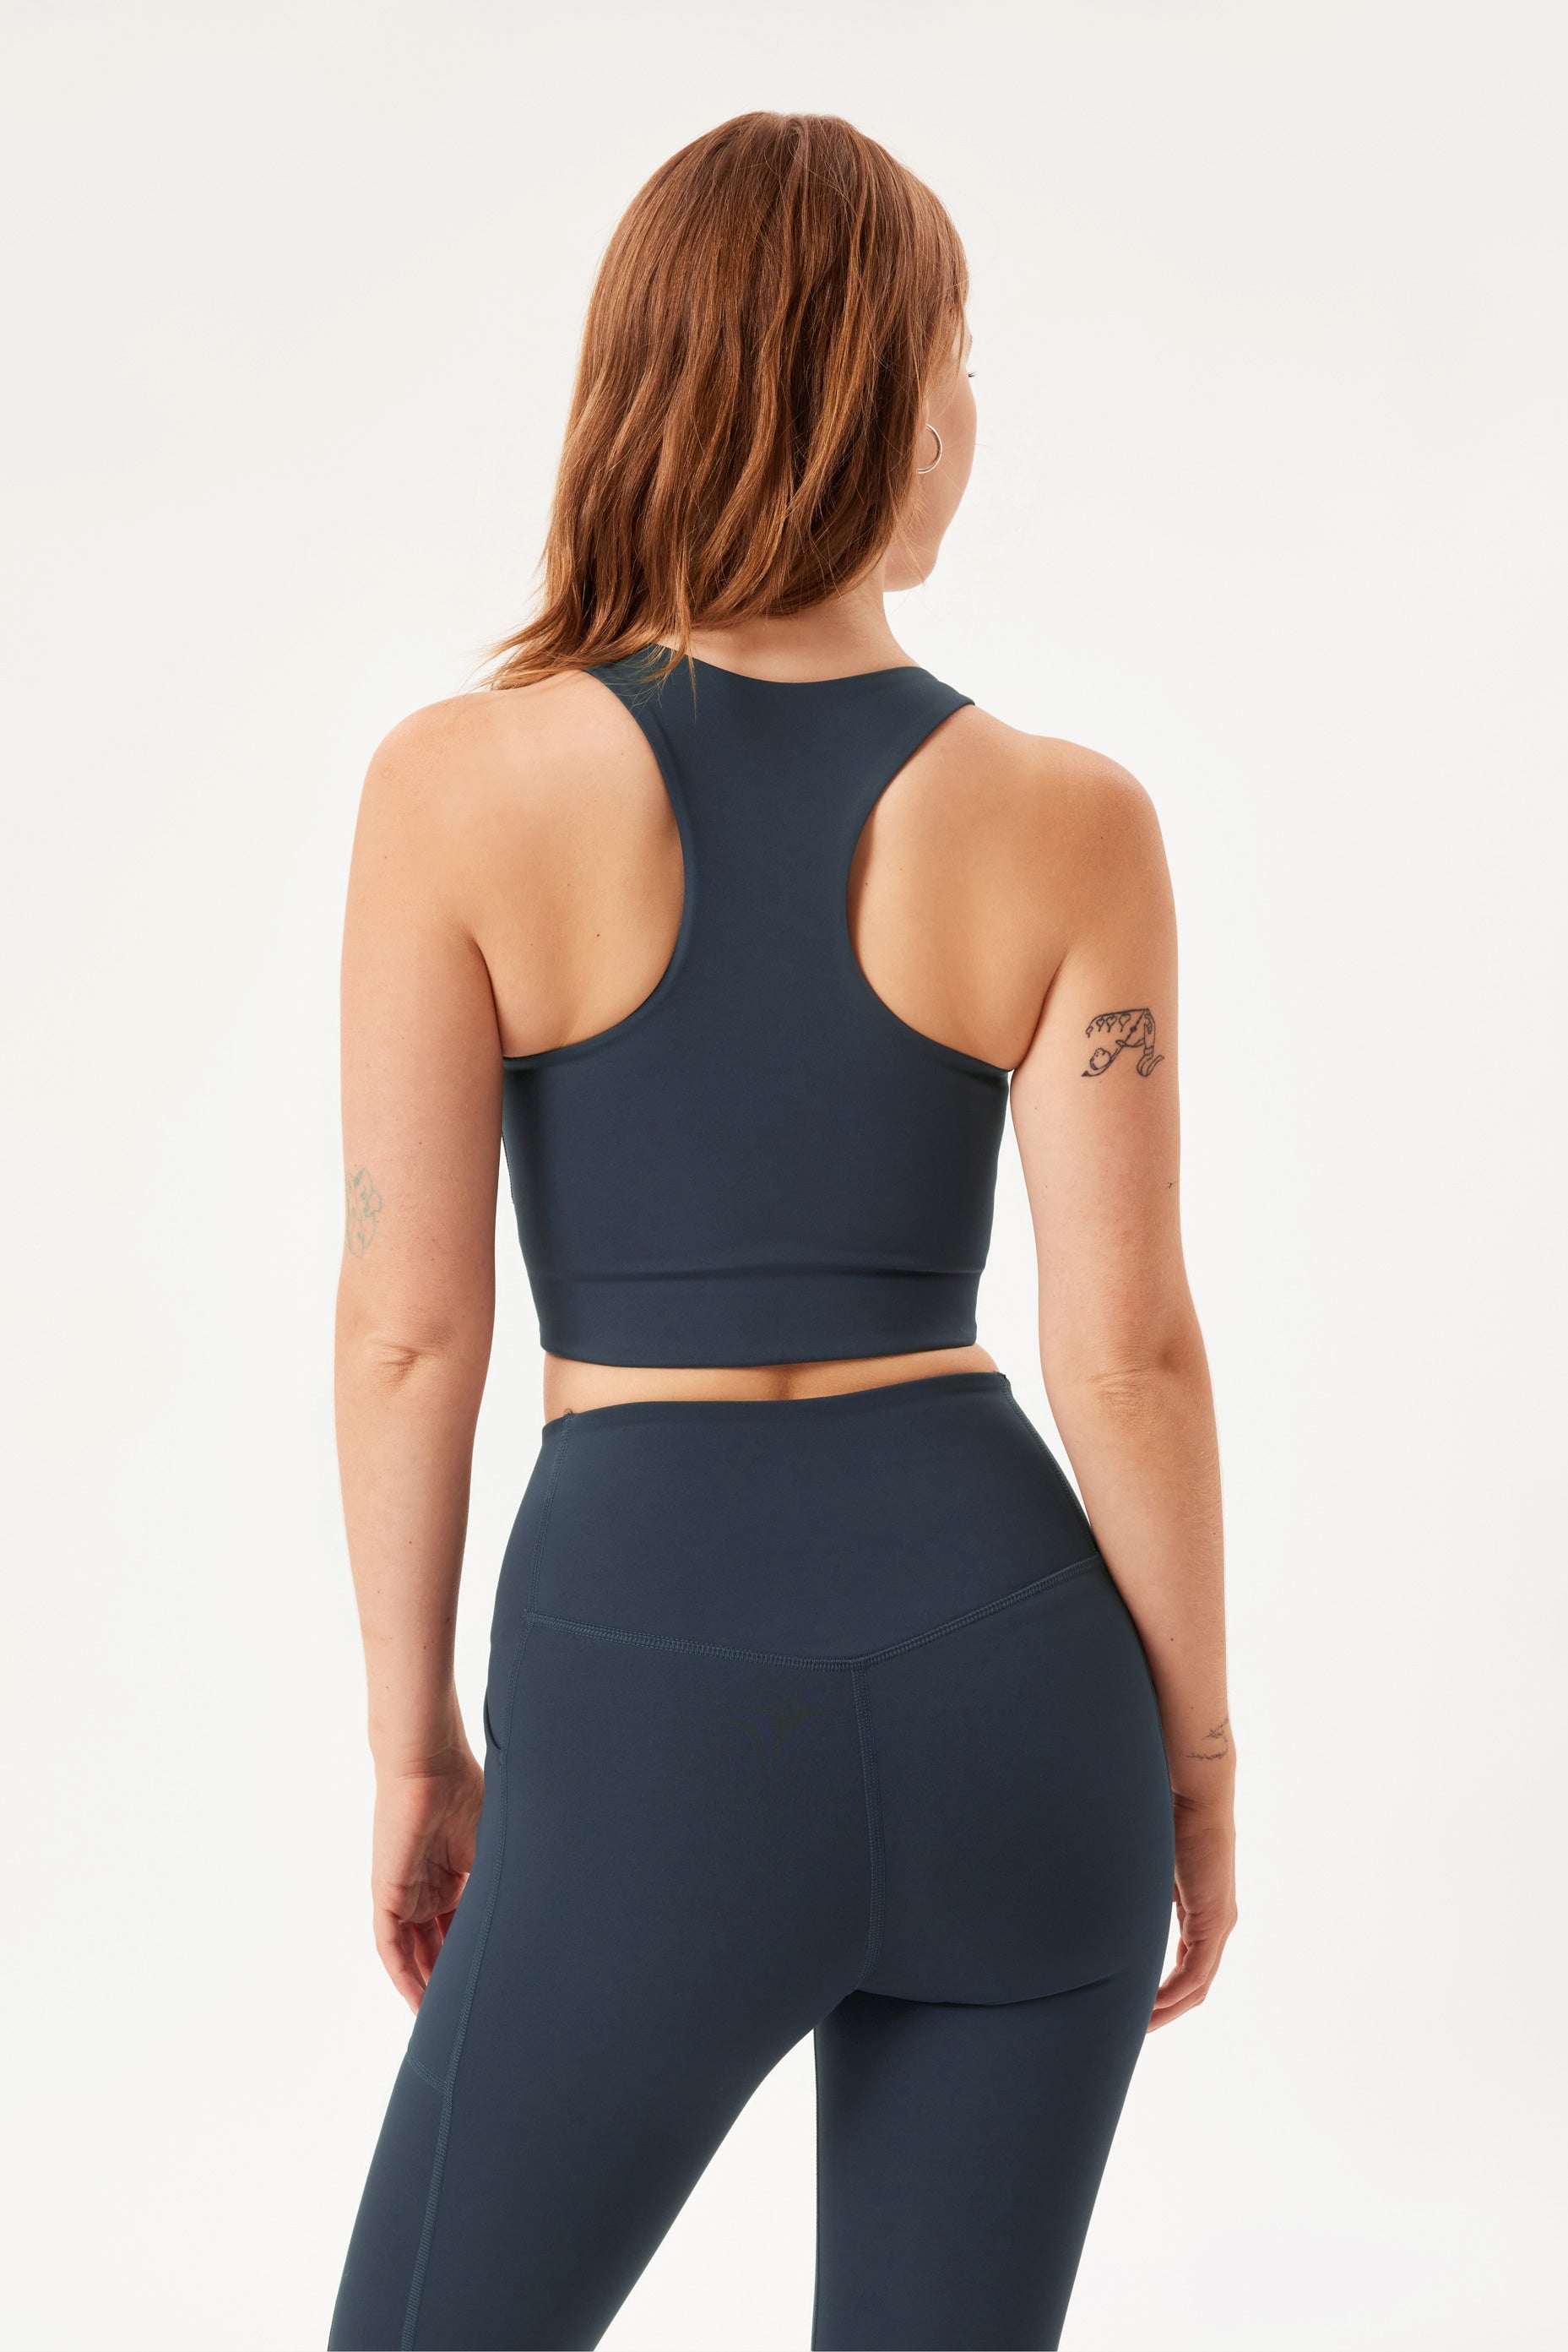 Girlfriend Collective Paloma Racerback Bra Review